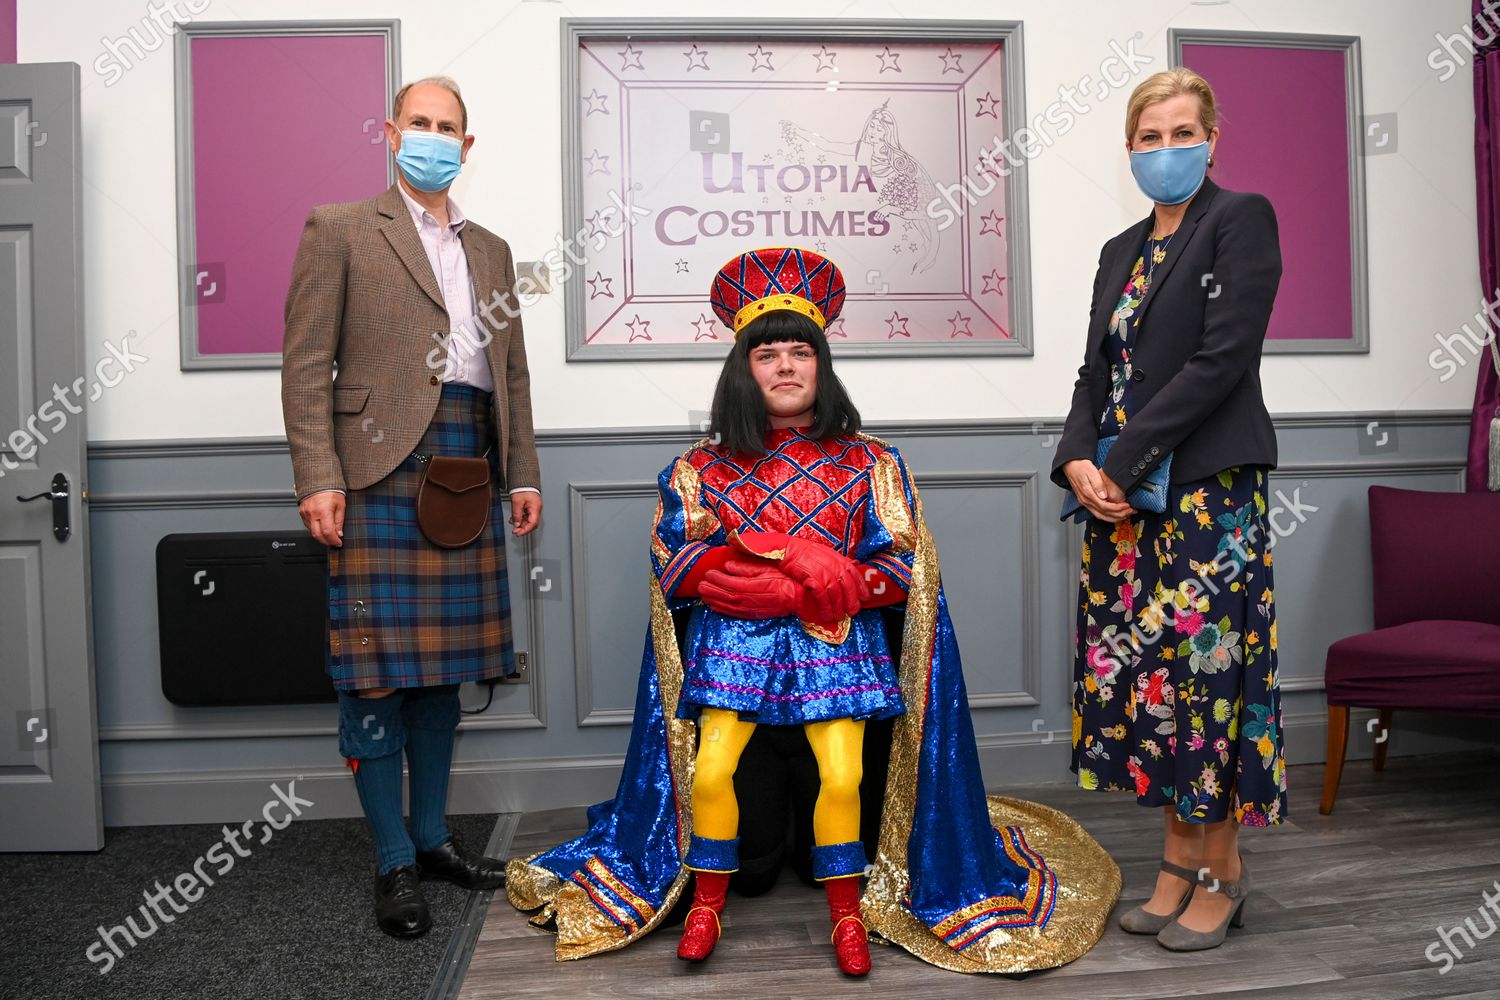 CASA REAL BRITÁNICA - Página 75 Prince-edward-and-sophie-countess-of-wessex-visit-to-utopia-costumes-forfar-scotland-uk-shutterstock-editorial-12172309be